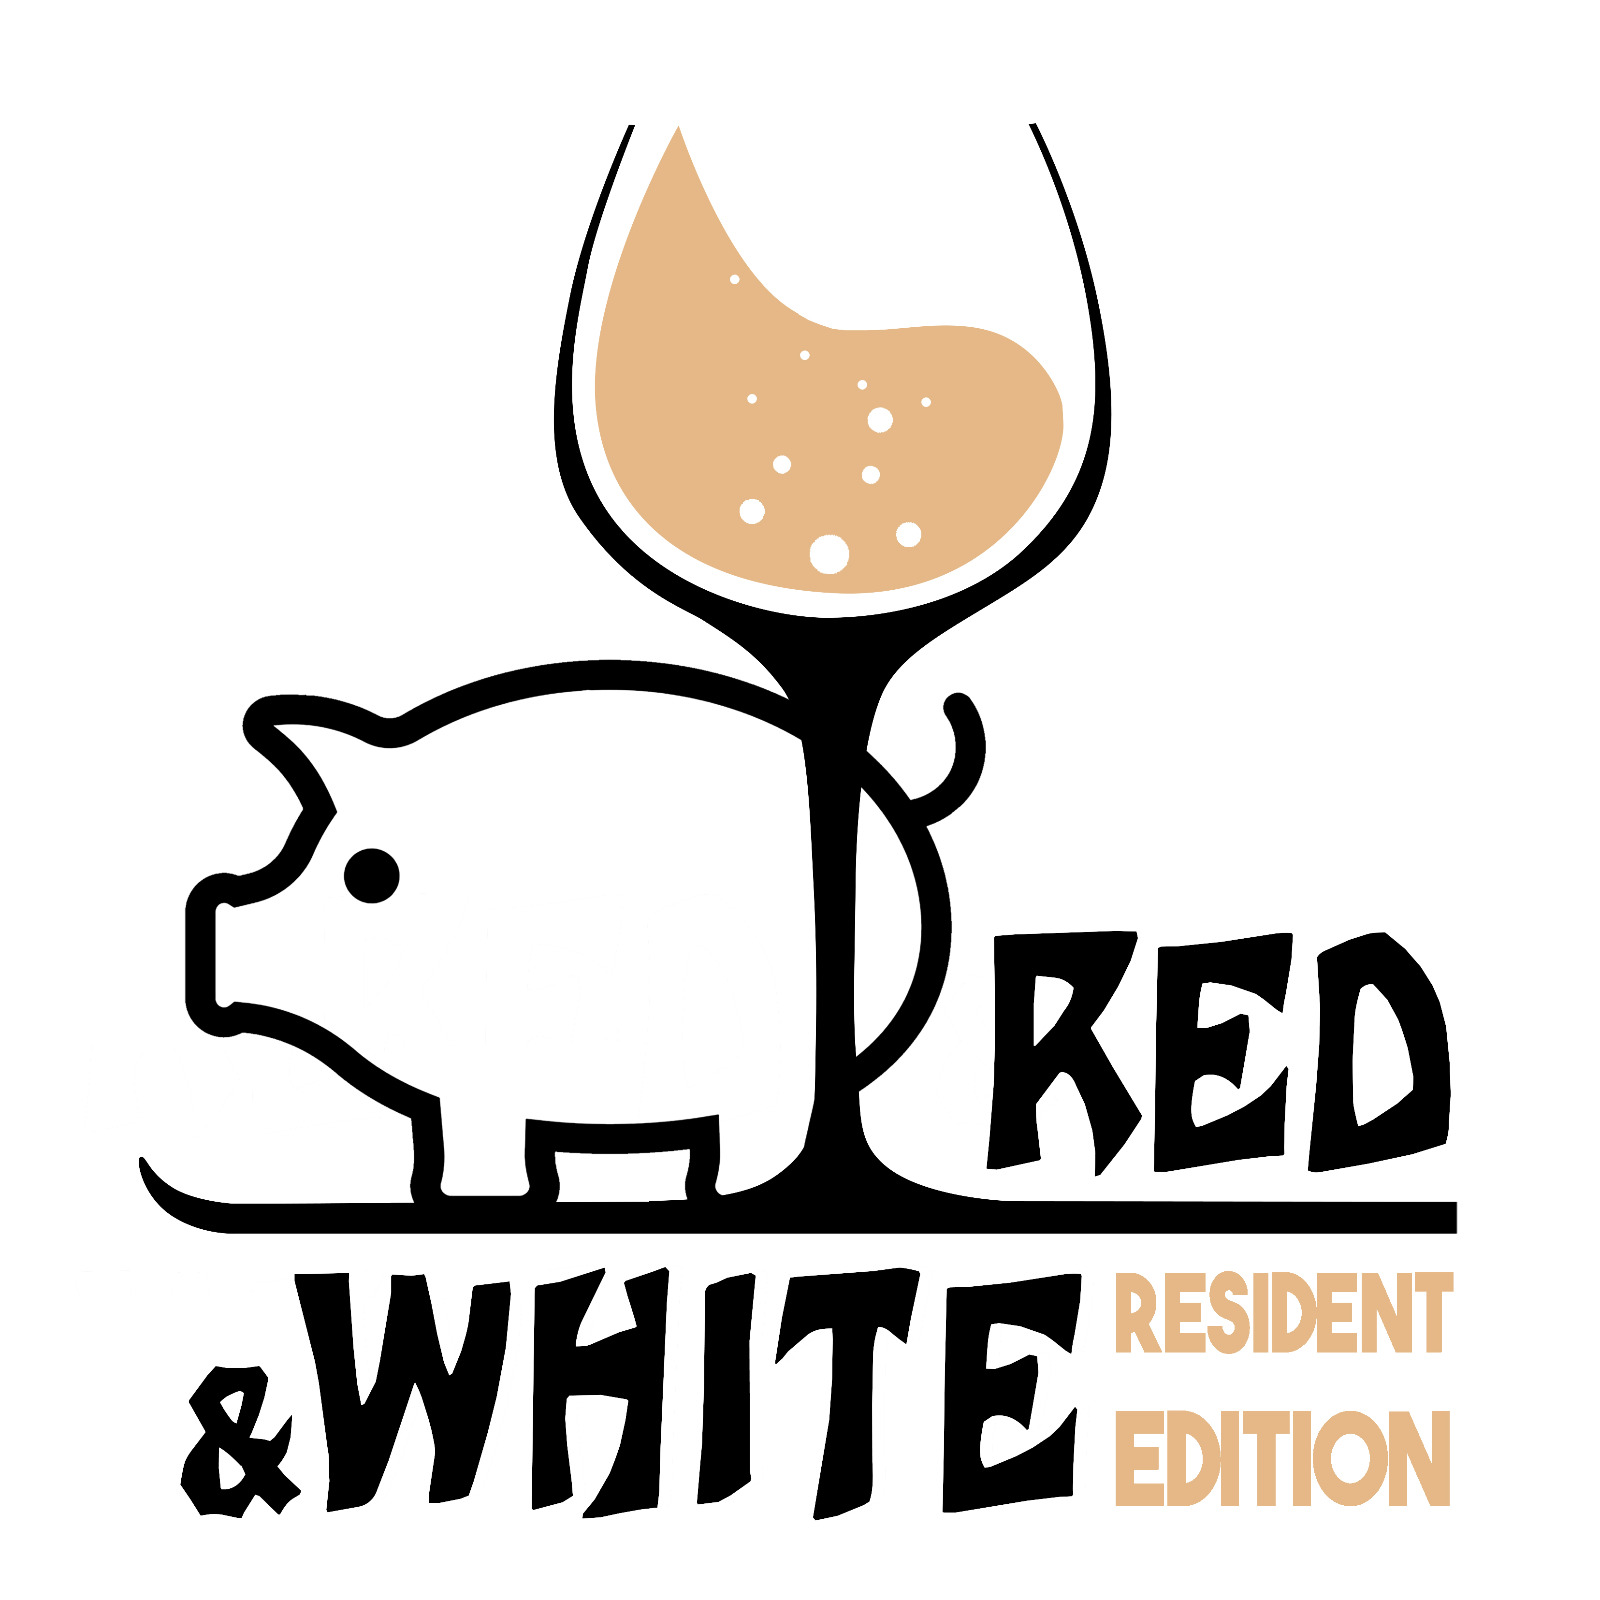 RED & WHITE RESIDENT EDITION